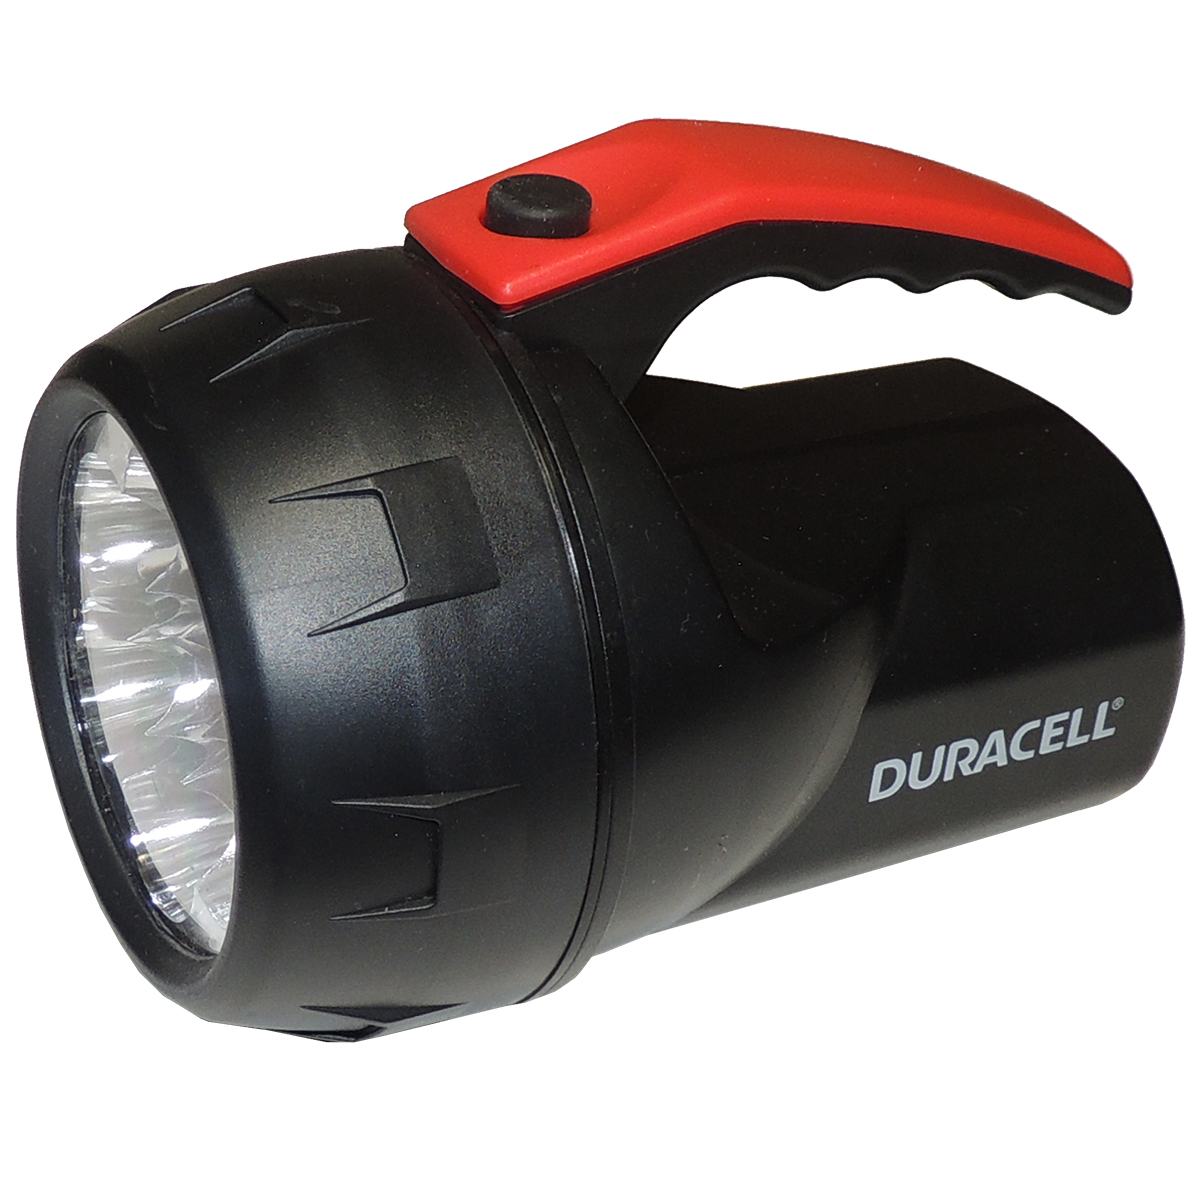 Duracell Daylite Laterne Tough LED 6v Laterne Flash Taschenlampe Hand Lampe Arbeit Camping 